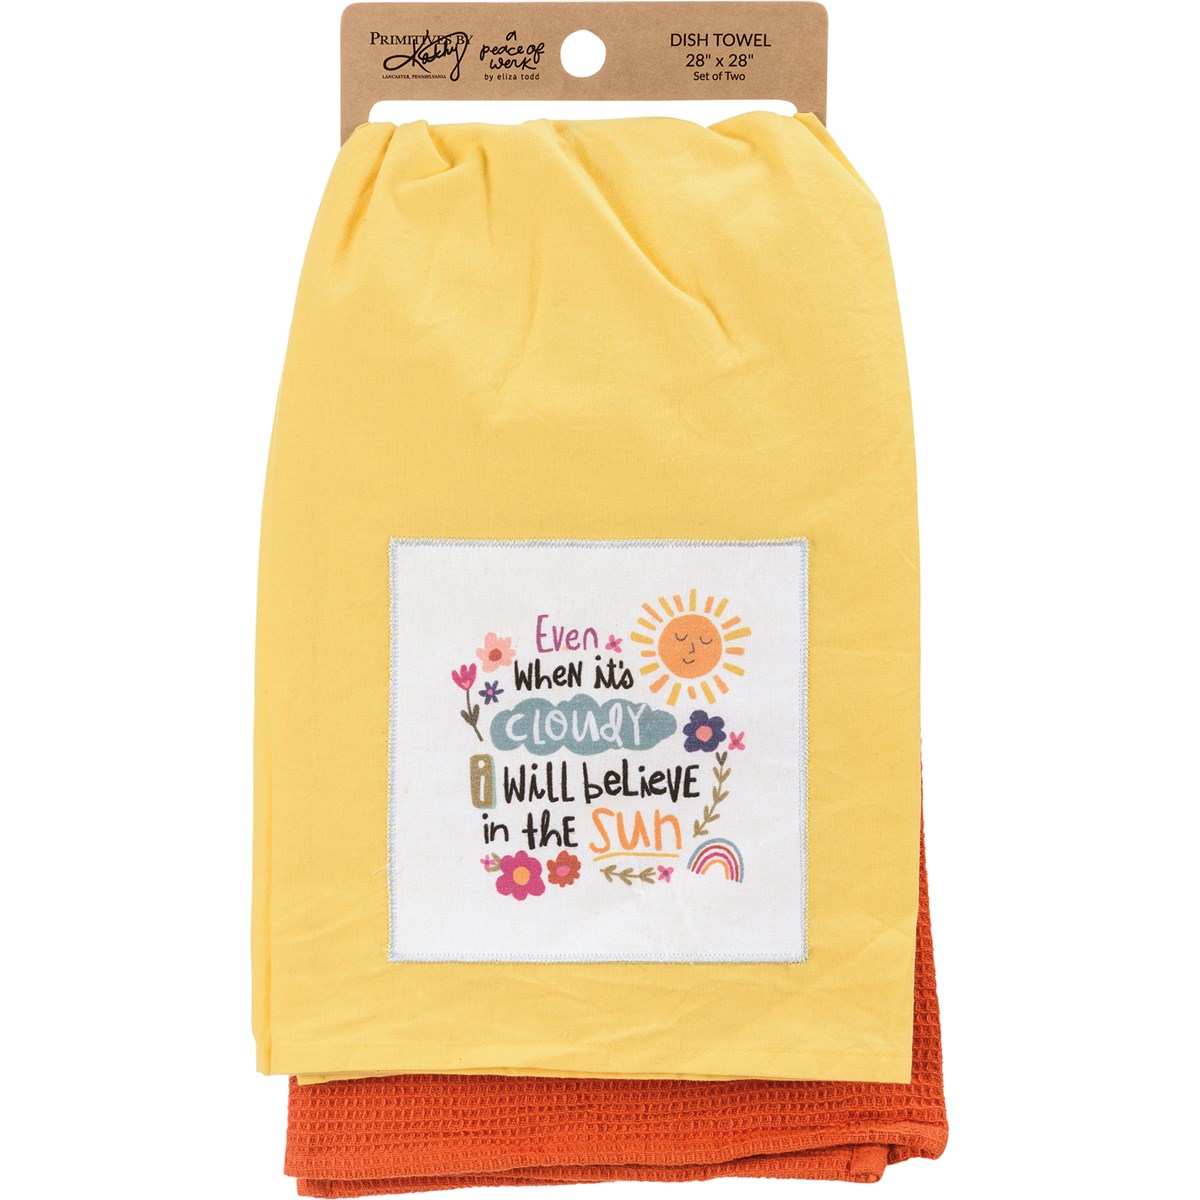 I Will Believe In The Sun Kitchen Towel Set - Cotton